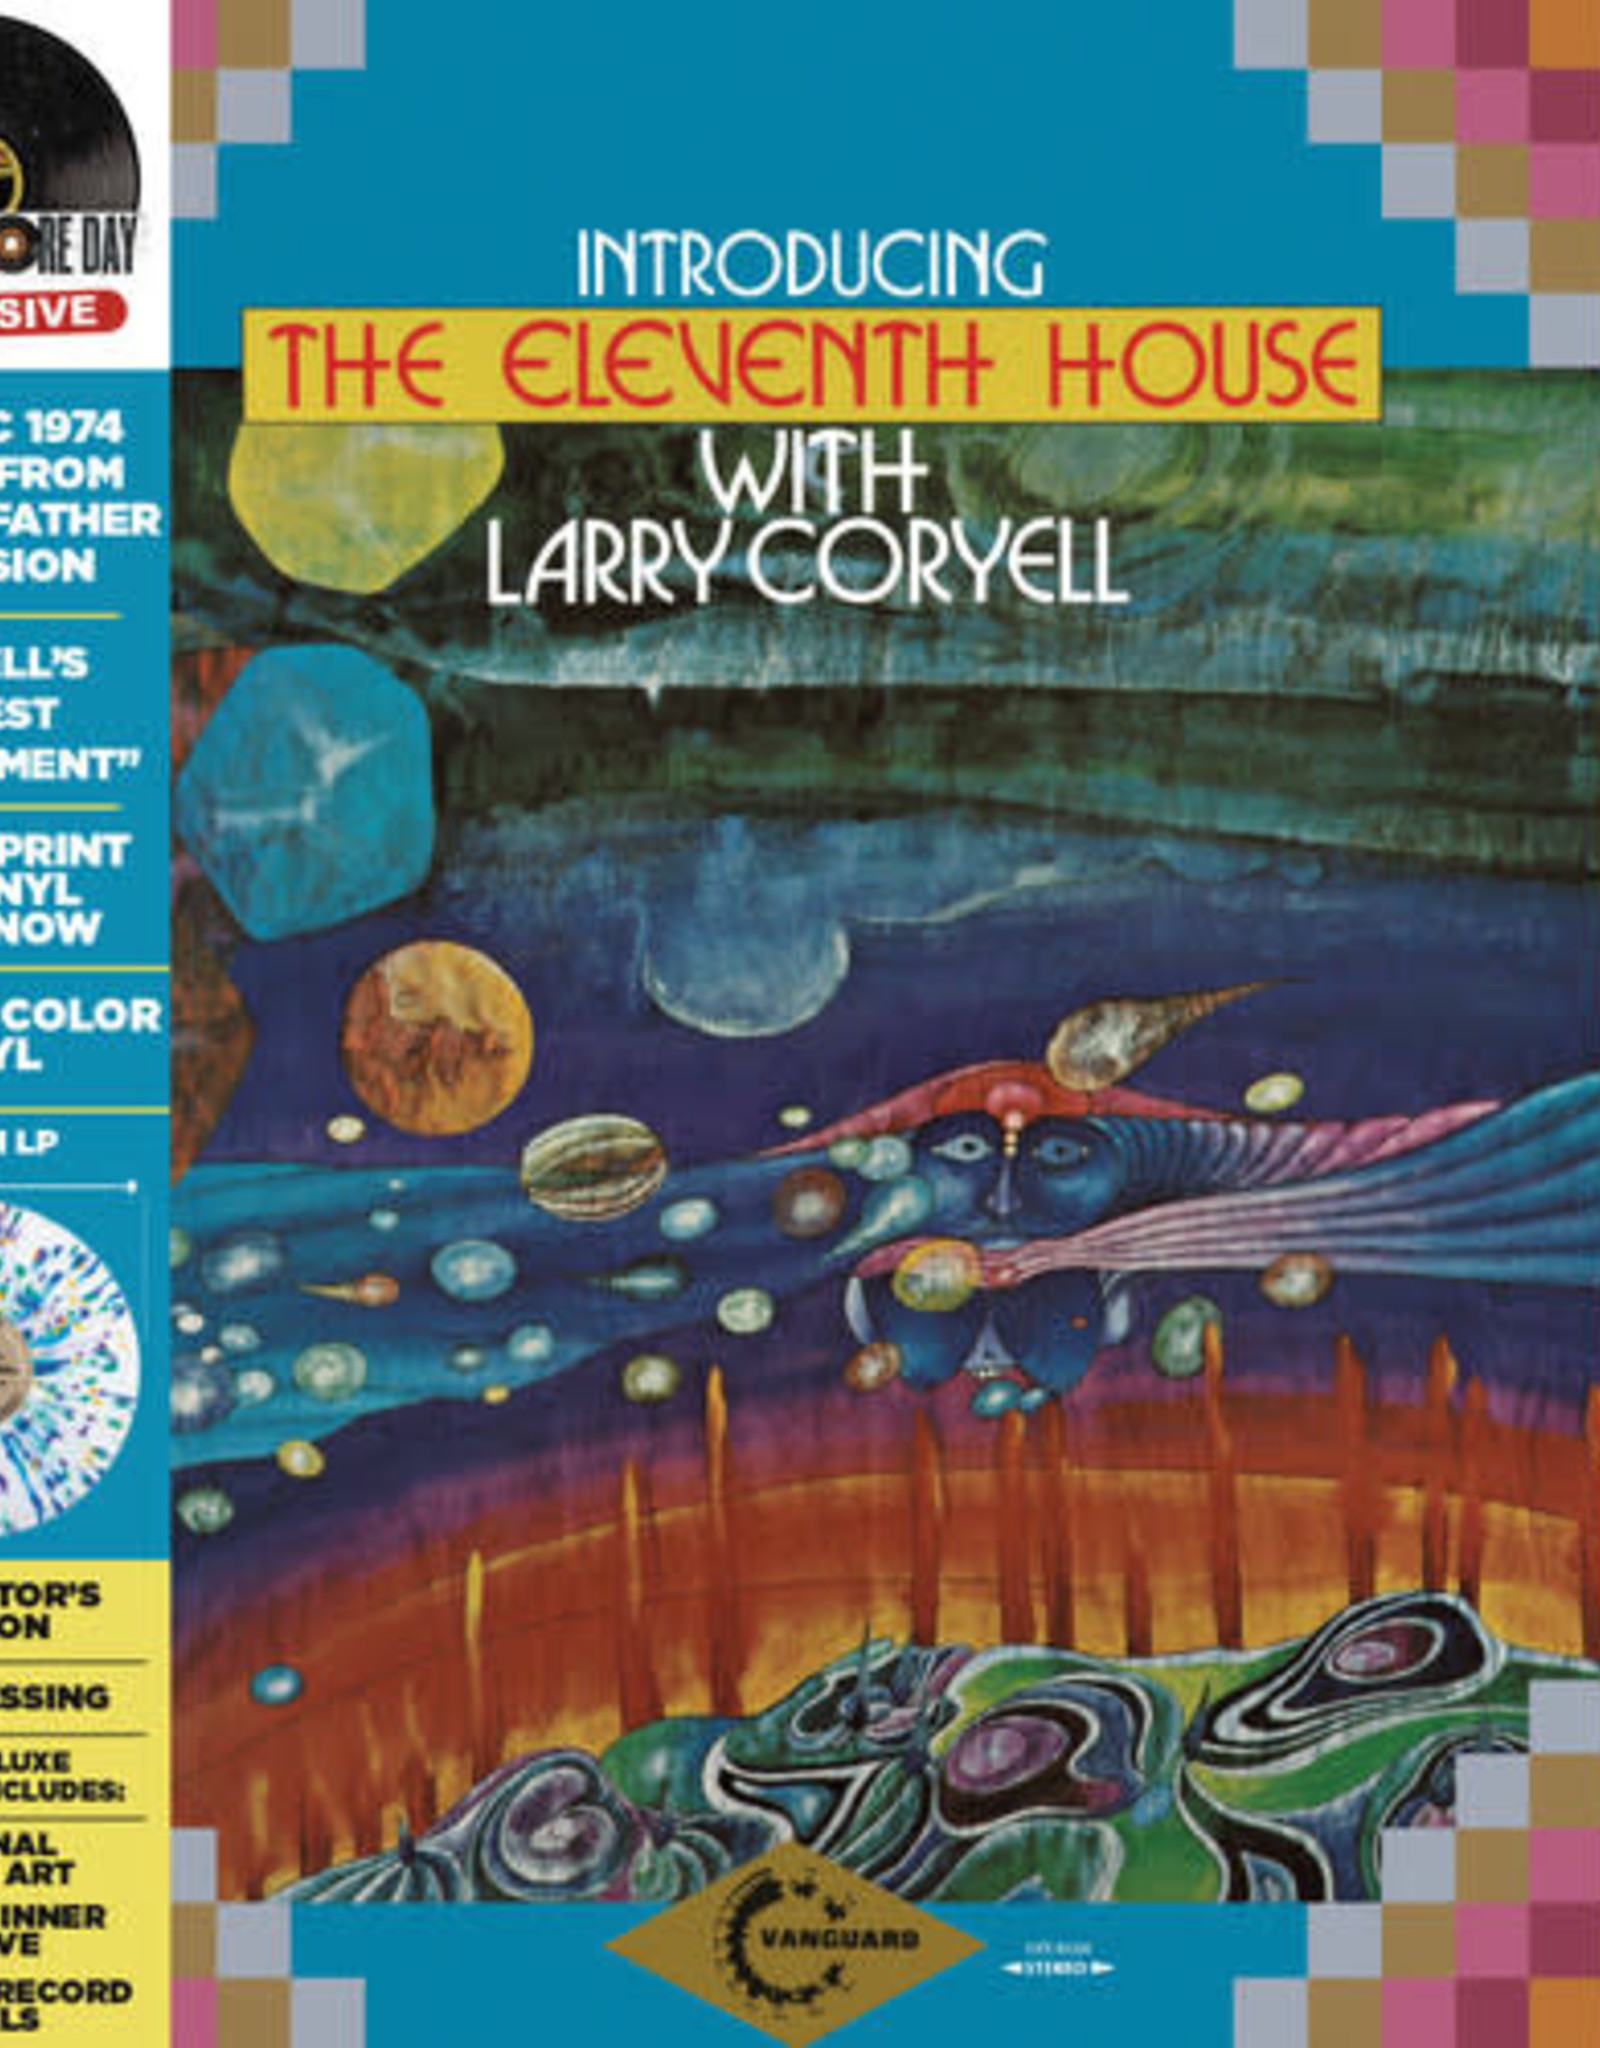 Larry Coryell - Introducing The Eleventh House (RSD 2023)